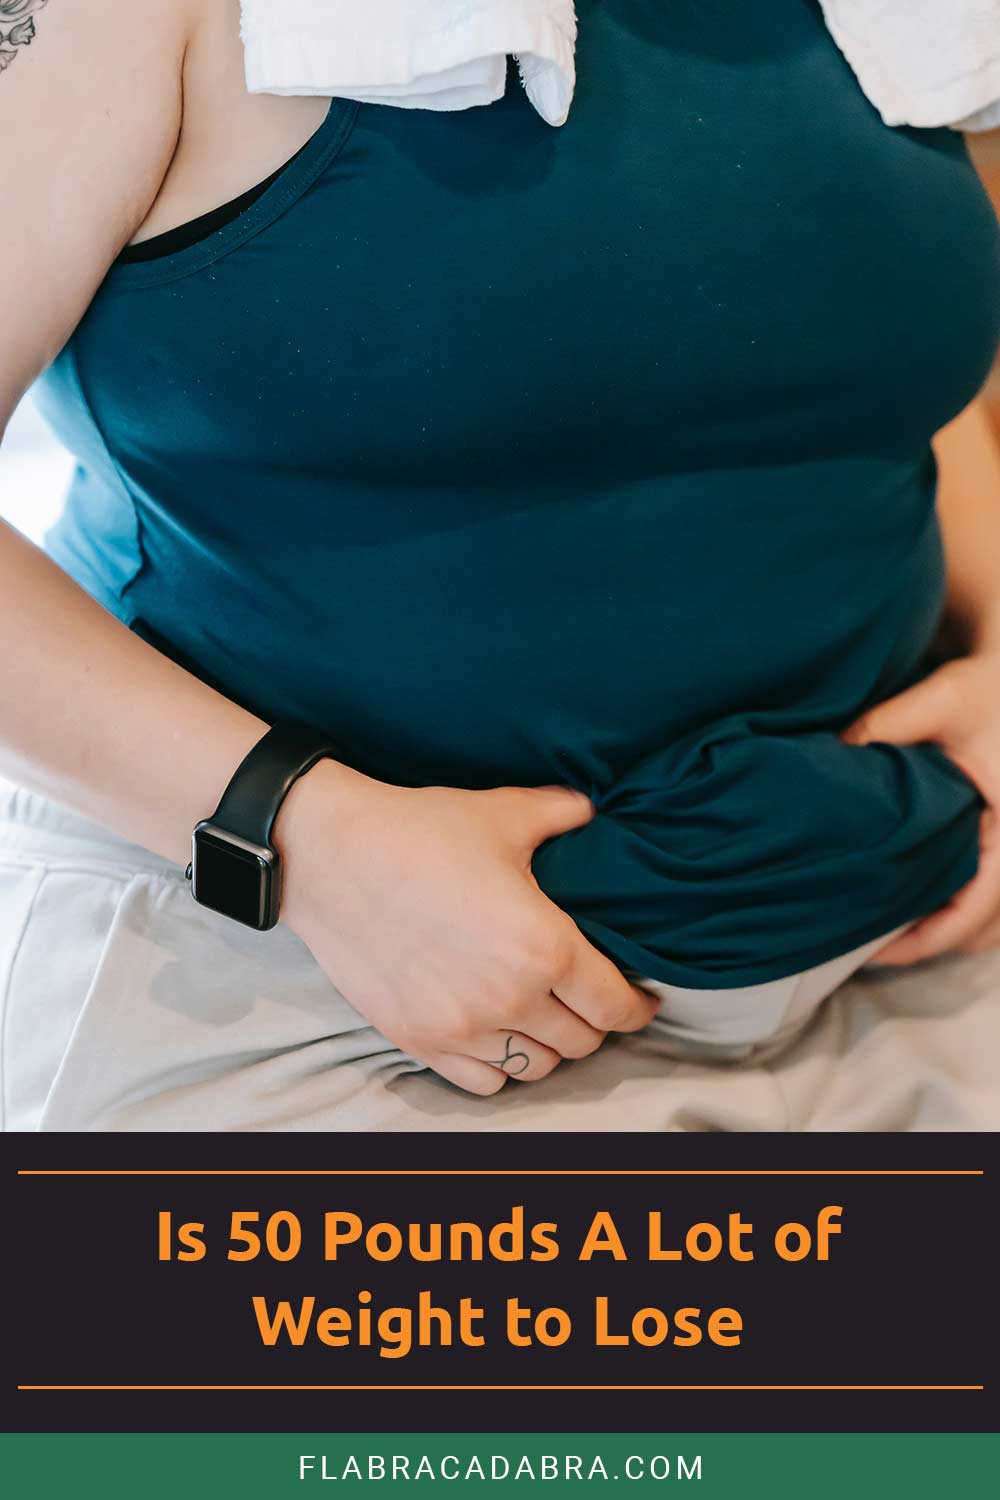 Person grabbing belly fat with two hands - Is 50 Pounds A Lot of Weight to Lose?